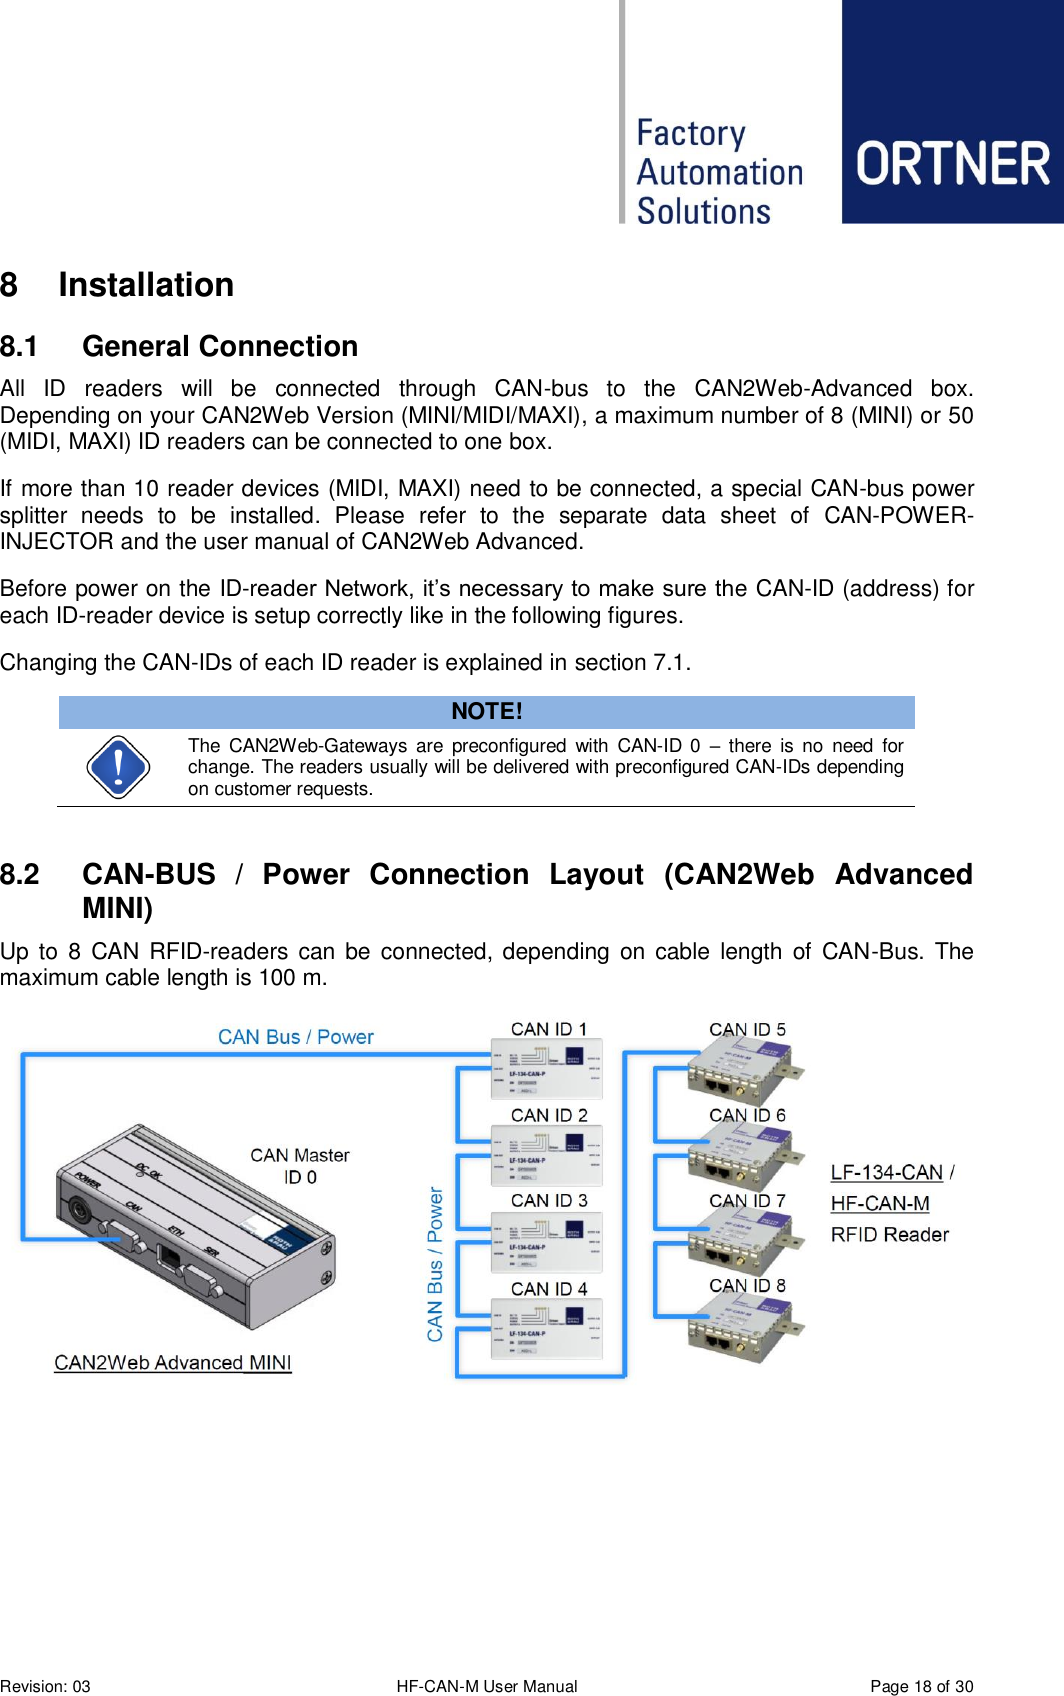  Revision: 03 HF-CAN-M User Manual  Page 18 of 30 8  Installation 8.1  General Connection All  ID  readers  will  be  connected  through  CAN-bus  to  the  CAN2Web-Advanced  box. Depending on your CAN2Web Version (MINI/MIDI/MAXI), a maximum number of 8 (MINI) or 50 (MIDI, MAXI) ID readers can be connected to one box. If more than 10 reader devices (MIDI, MAXI) need to be connected, a special CAN-bus power splitter  needs  to  be  installed.  Please  refer  to  the  separate  data  sheet  of  CAN-POWER-INJECTOR and the user manual of CAN2Web Advanced.  Before power on the ID-reader Network, it’s necessary to make sure the CAN-ID (address) for each ID-reader device is setup correctly like in the following figures. Changing the CAN-IDs of each ID reader is explained in section 7.1. NOTE!  The  CAN2Web-Gateways are  preconfigured  with  CAN-ID  0  –  there  is  no  need  for change. The readers usually will be delivered with preconfigured CAN-IDs depending on customer requests.  8.2  CAN-BUS  /  Power  Connection  Layout  (CAN2Web  Advanced MINI) Up  to  8  CAN RFID-readers can  be  connected, depending on cable  length of  CAN-Bus.  The maximum cable length is 100 m.     